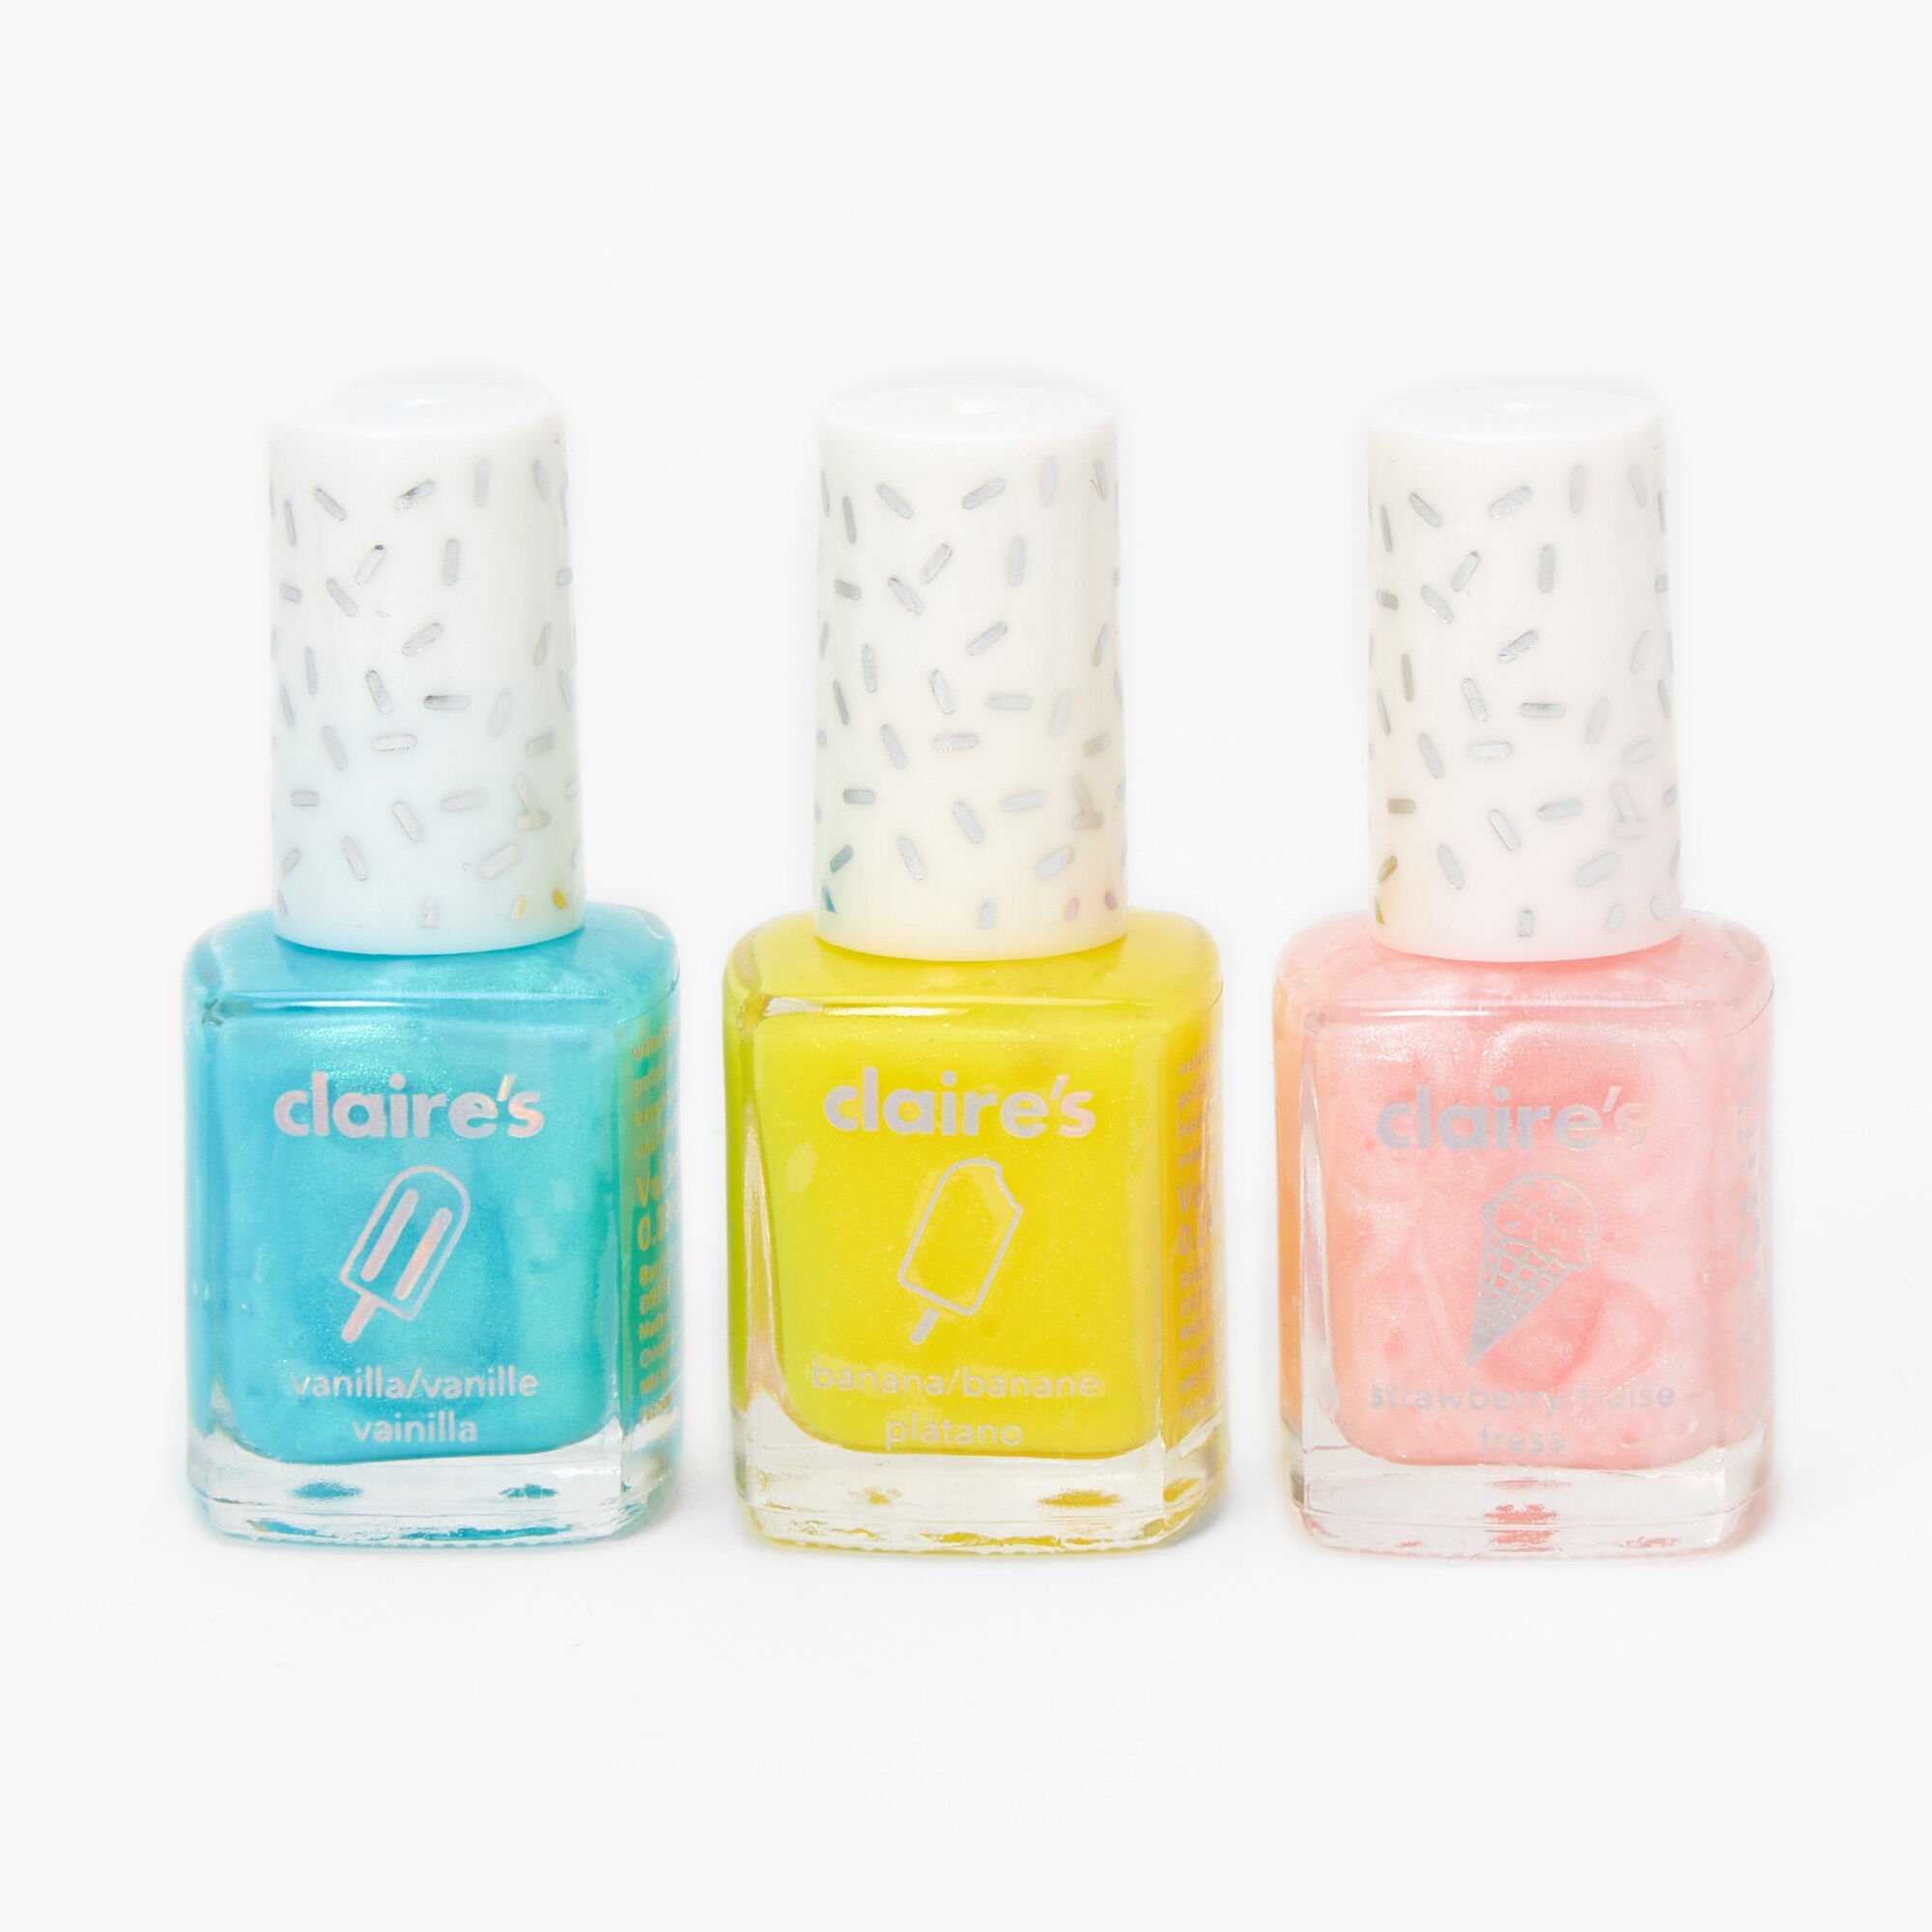 View Claires Sweets Scented Nail Polish Set 3 Pack information